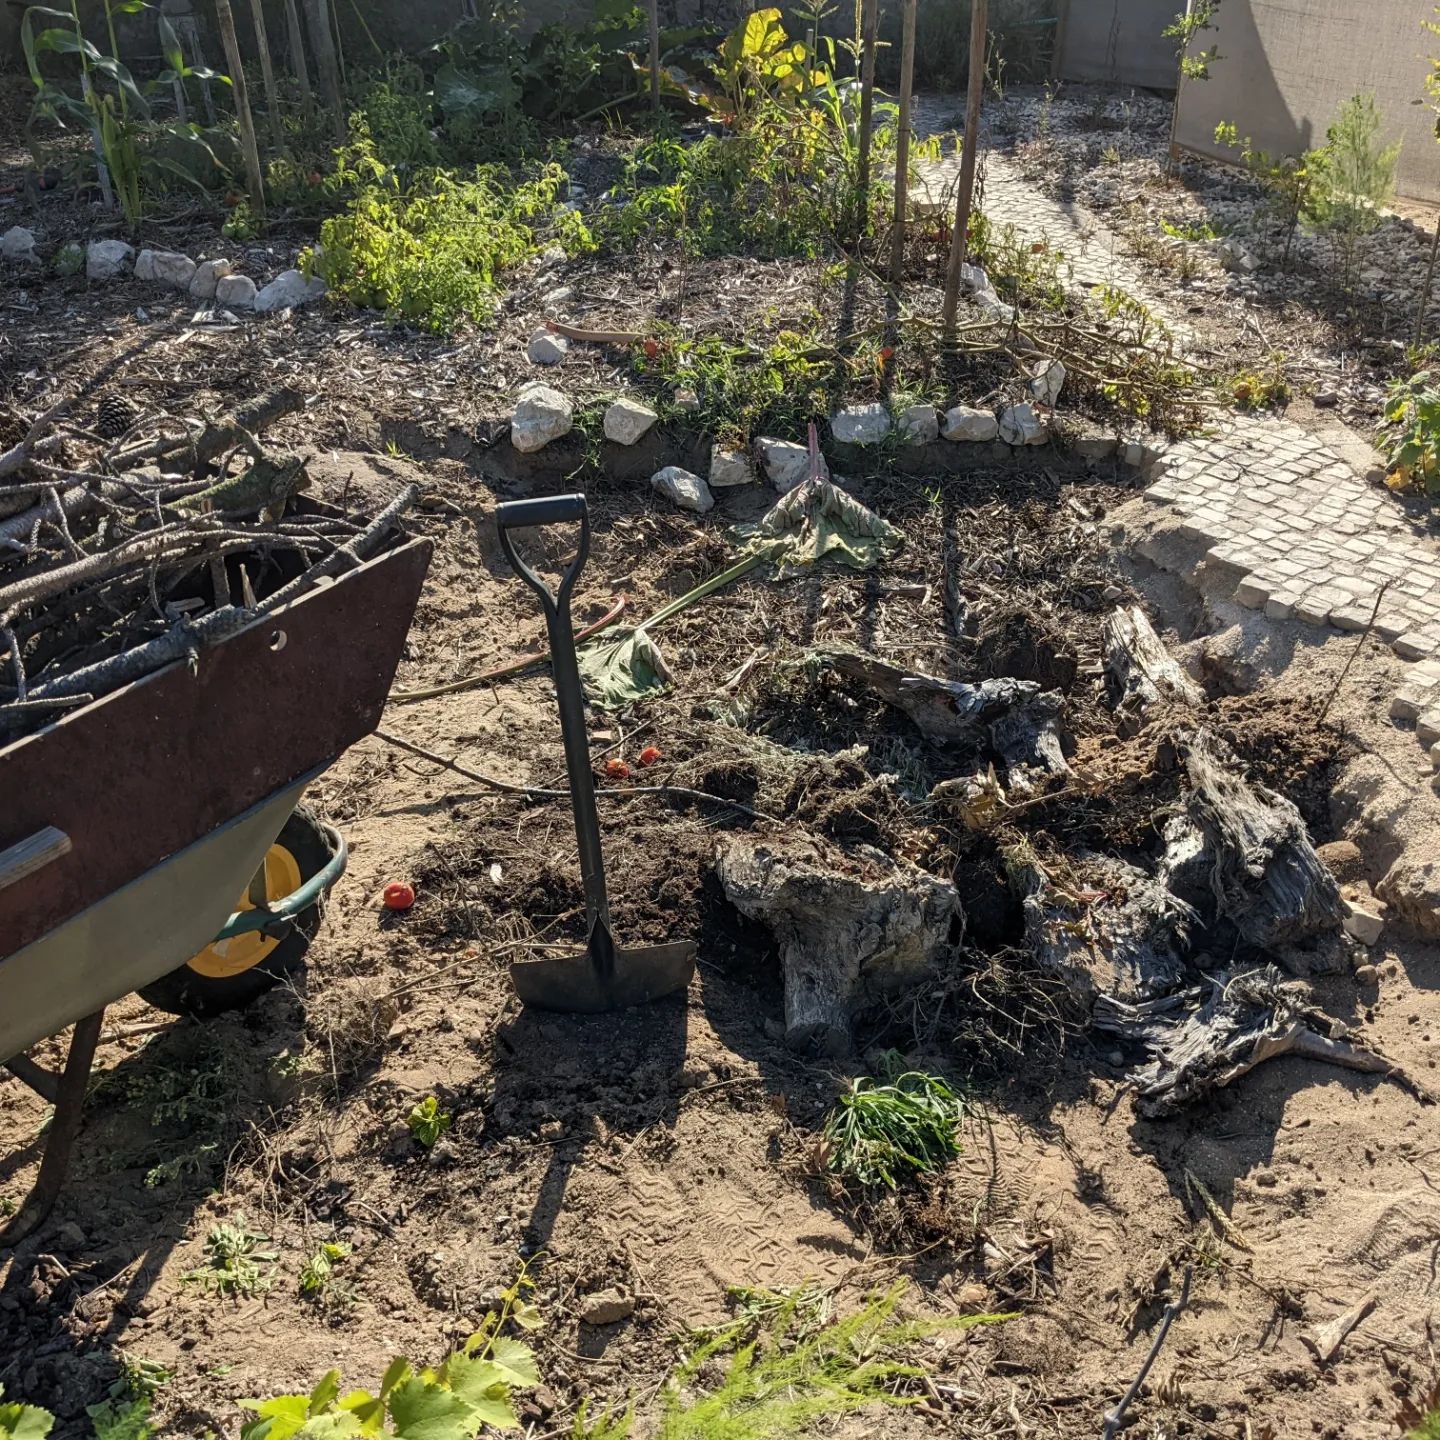 Filling the hole left from removing the old brick raised bed with woody stuff (eucalyptus chunks, pine branches, and hortênsias cut yesterday) to make a hugelbed